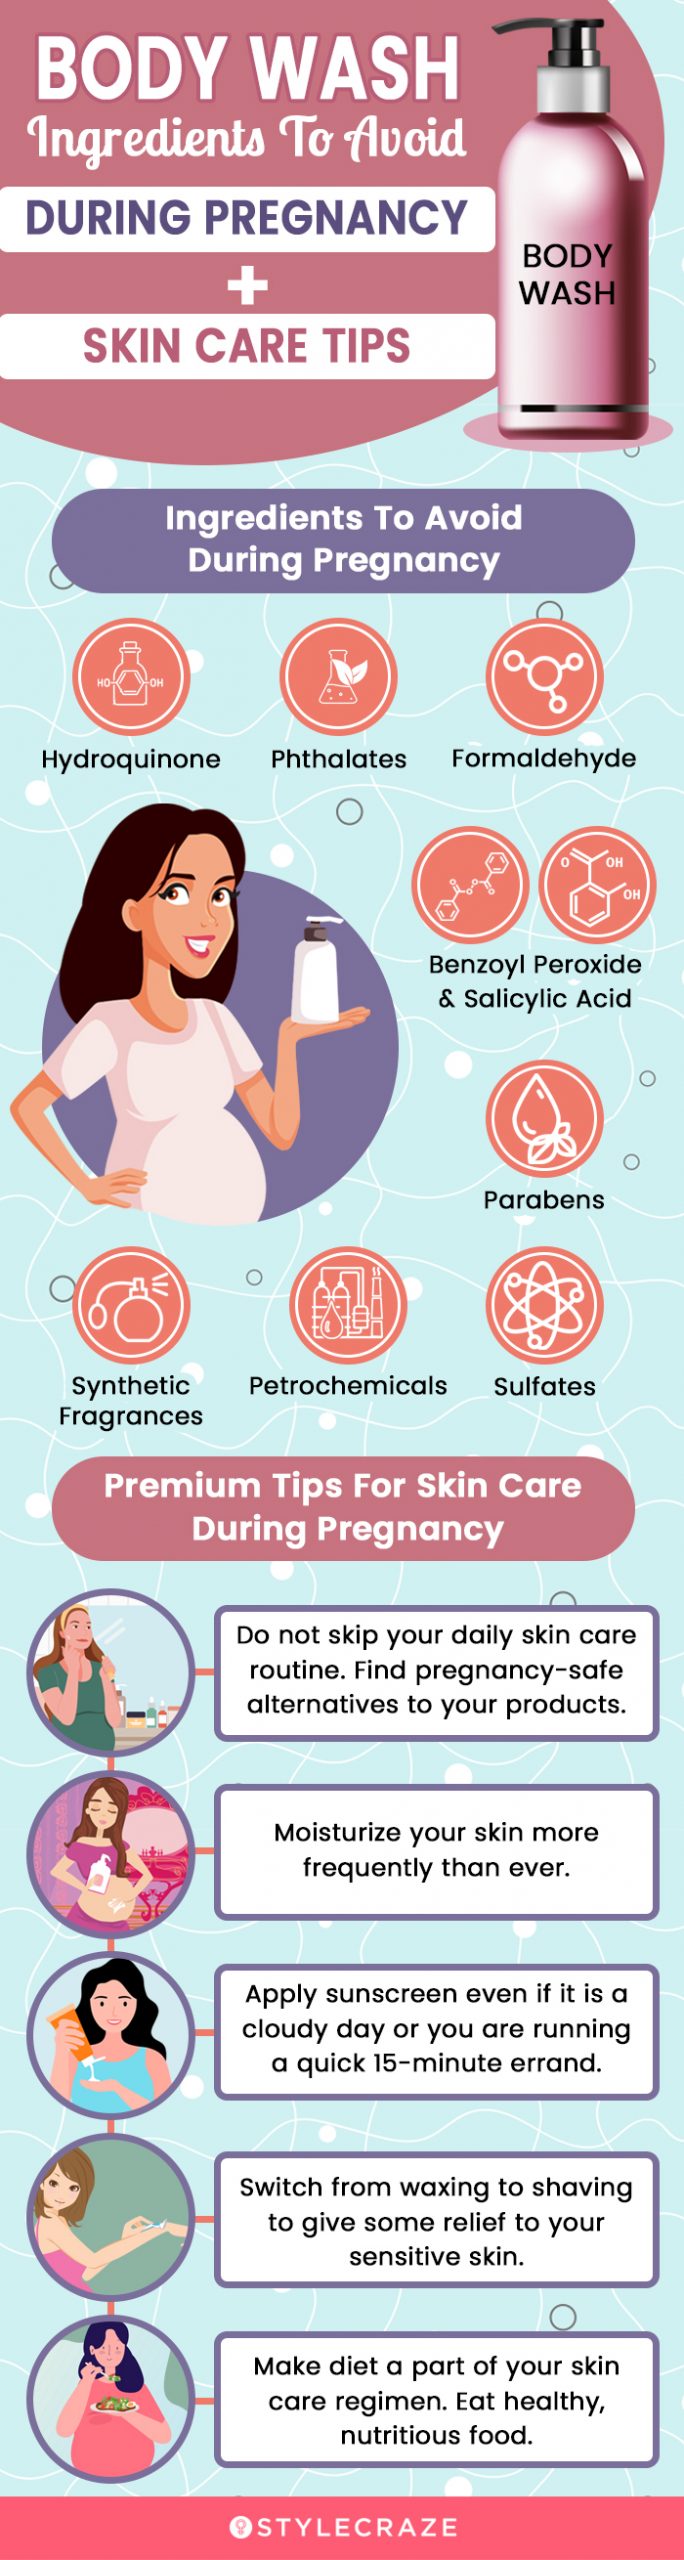 Body Wash Ingredients To Avoid During Pregnancy + Skin Care Tips [infographic]